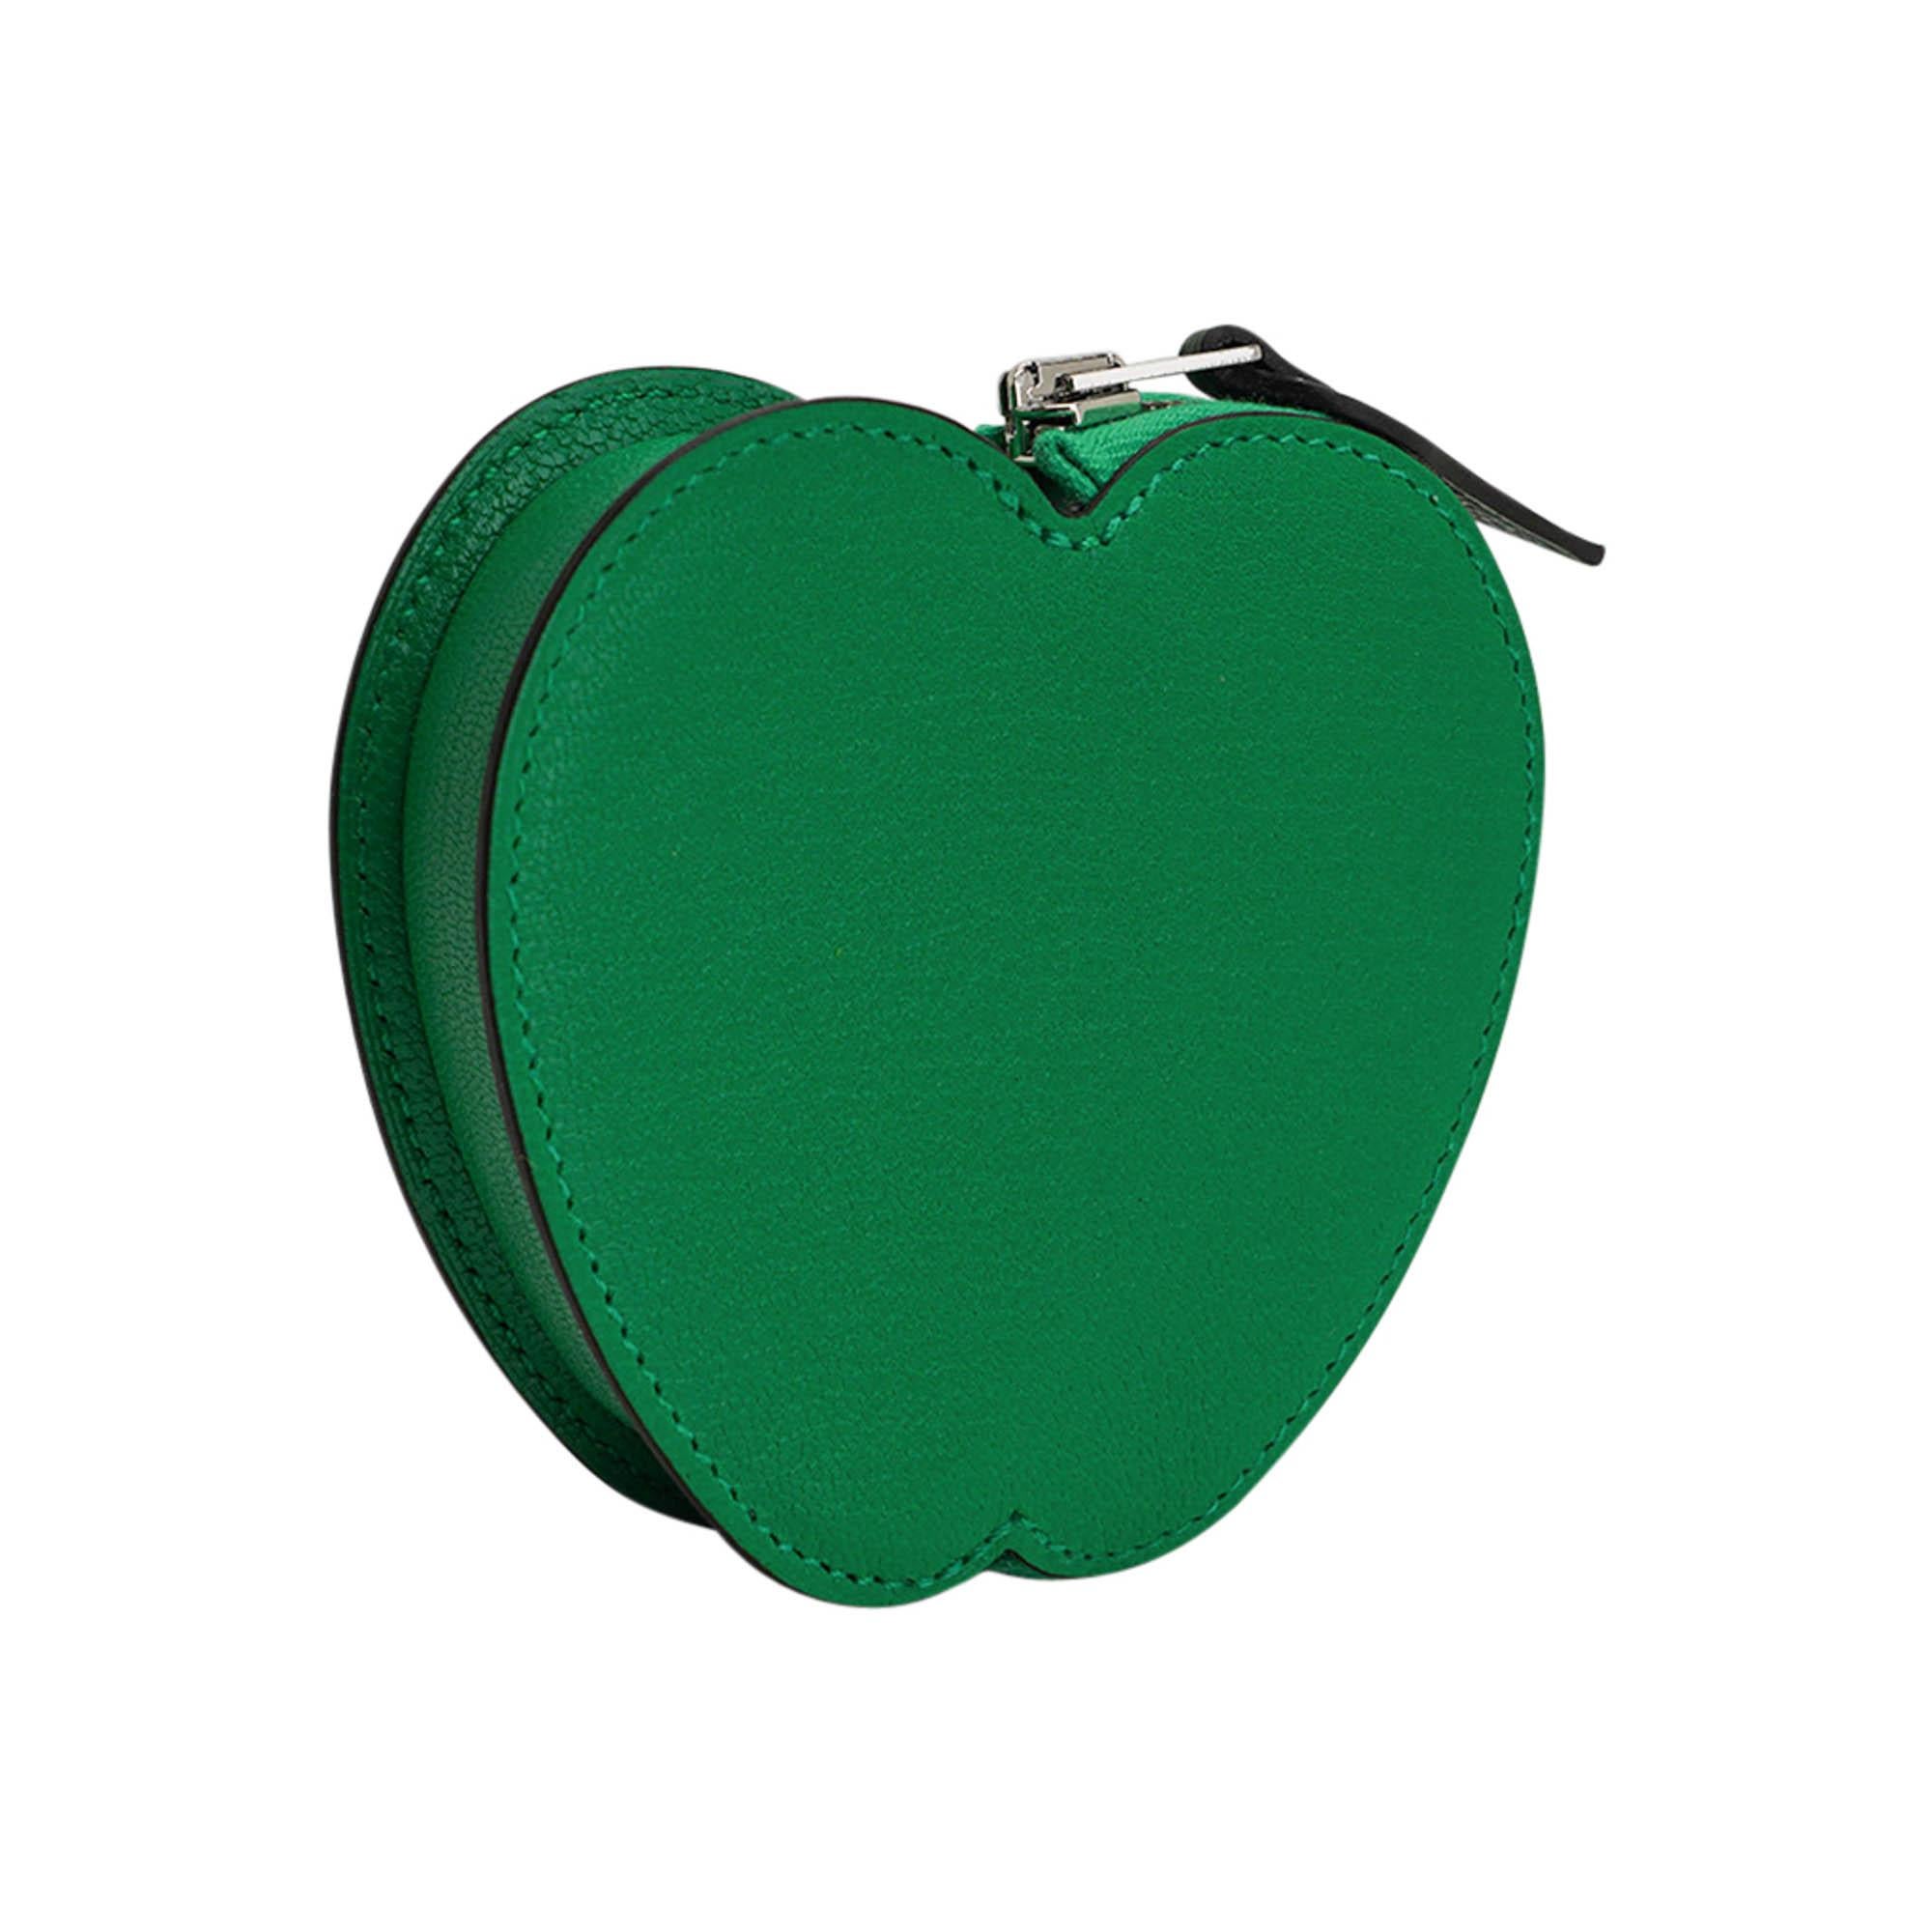 Mightychic offers a rare Hermes Pochette Pomme Pouch Buckle featured in Bambou.
Fits a 24 mm belt for a fun accessory perfect for earbuds, credit cards, keys or change.
This charming Hermes change purse in Mysore Chevre is a rare find.
Dark Green